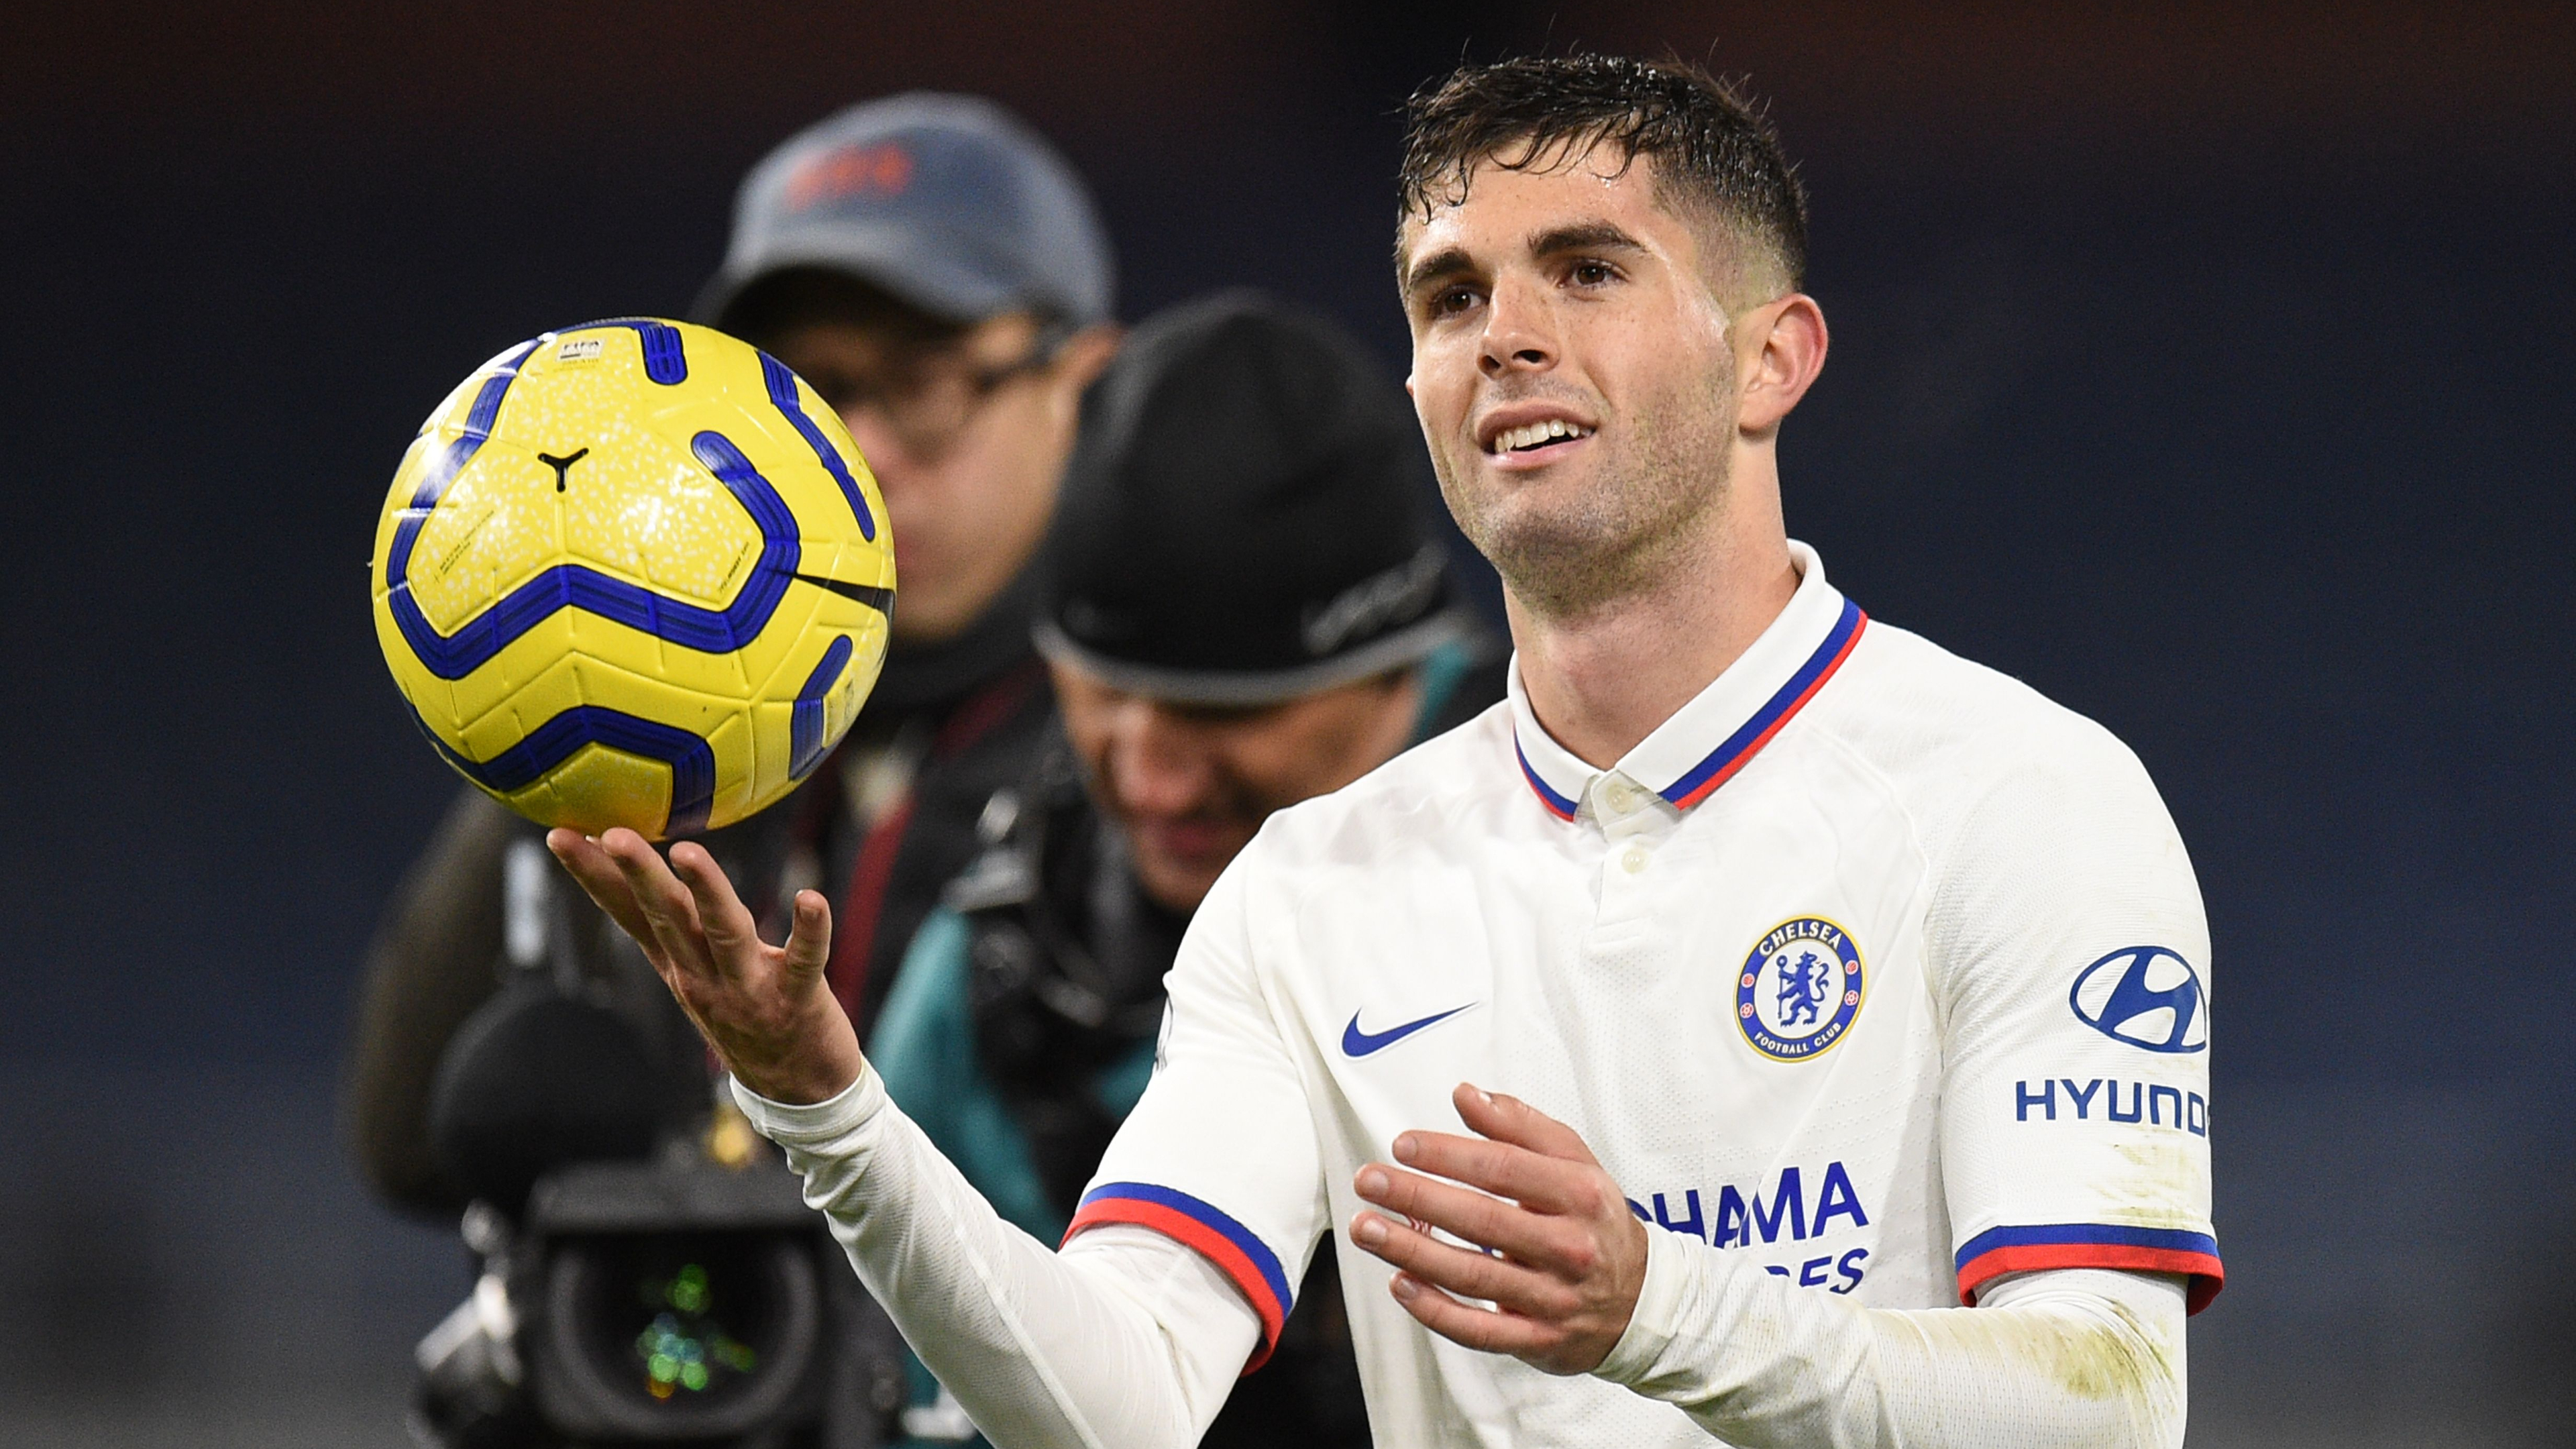 Hat-trick hero Pulisic will become Chelsea's prized asset, says Nevin